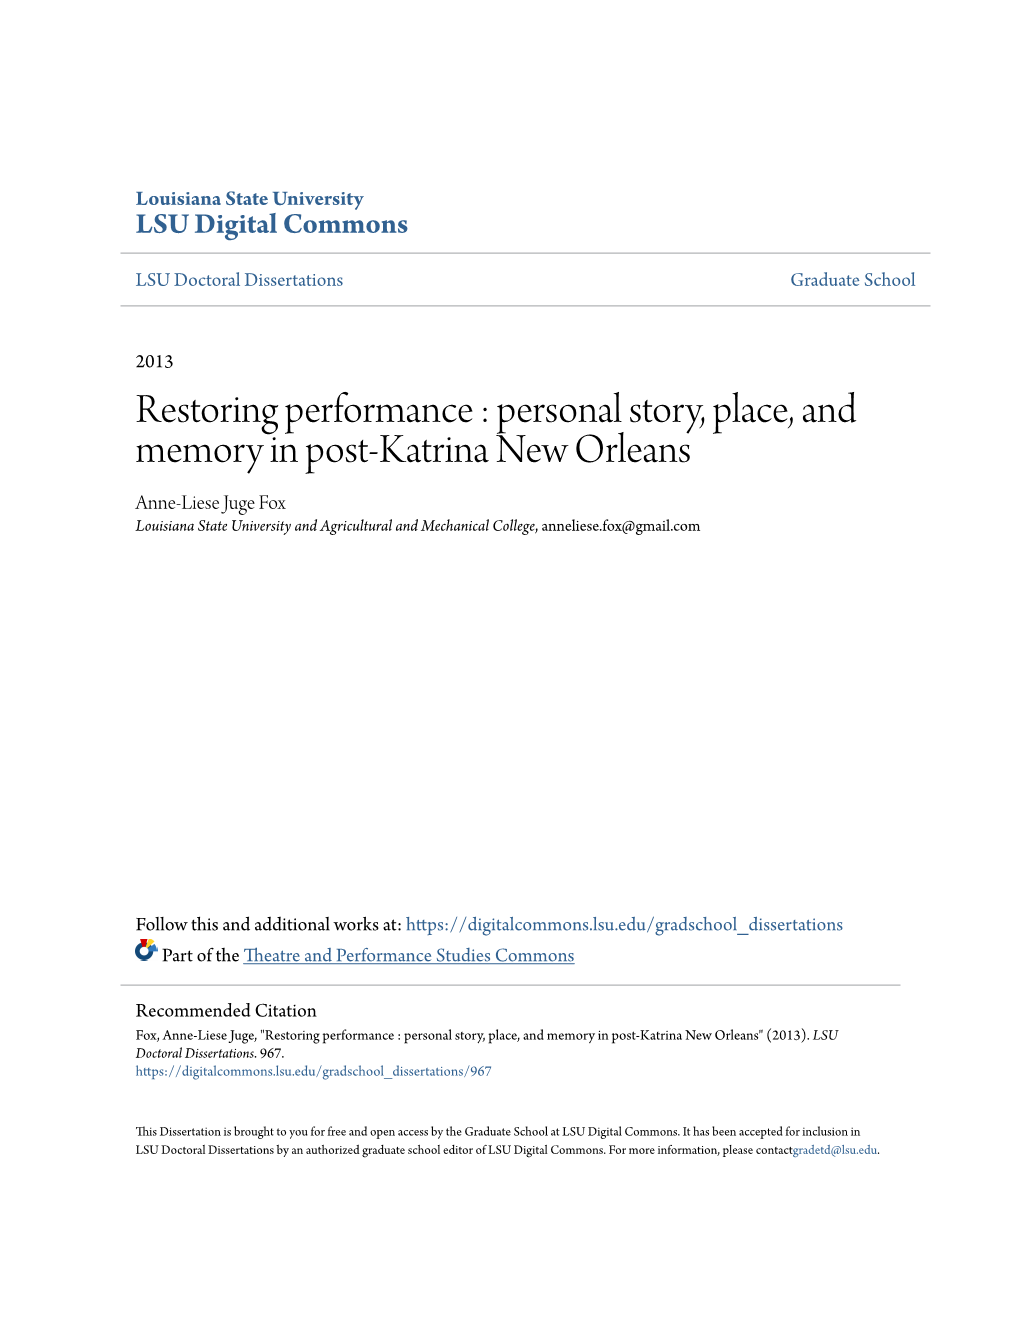 Restoring Performance : Personal Story, Place, and Memory in Post-Katrina New Orleans